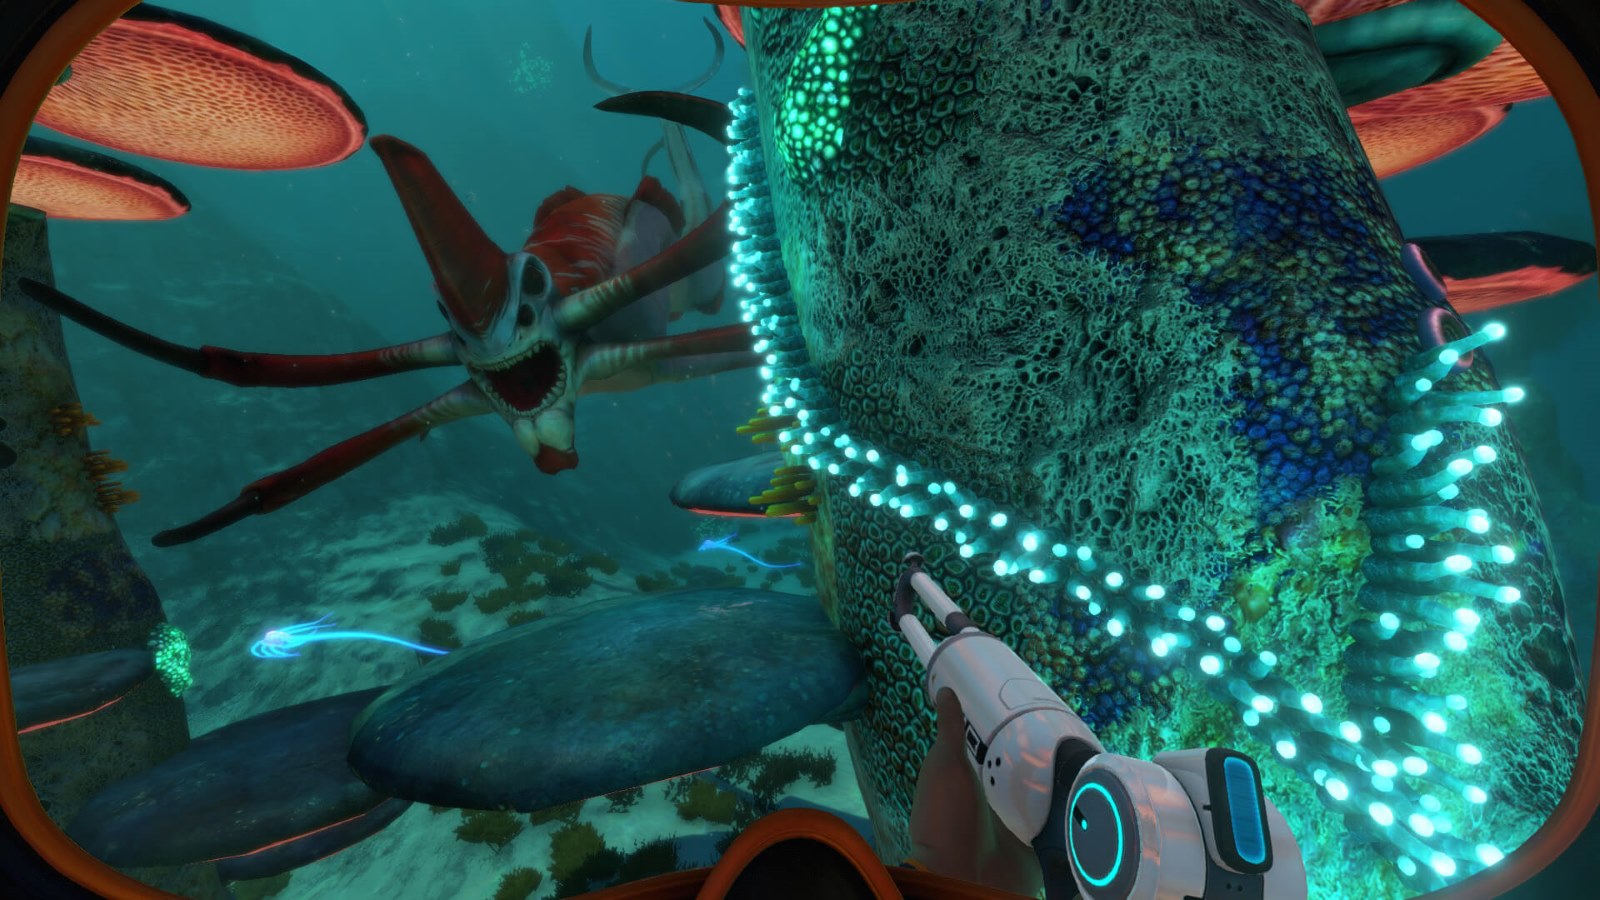 how to subnautica for free